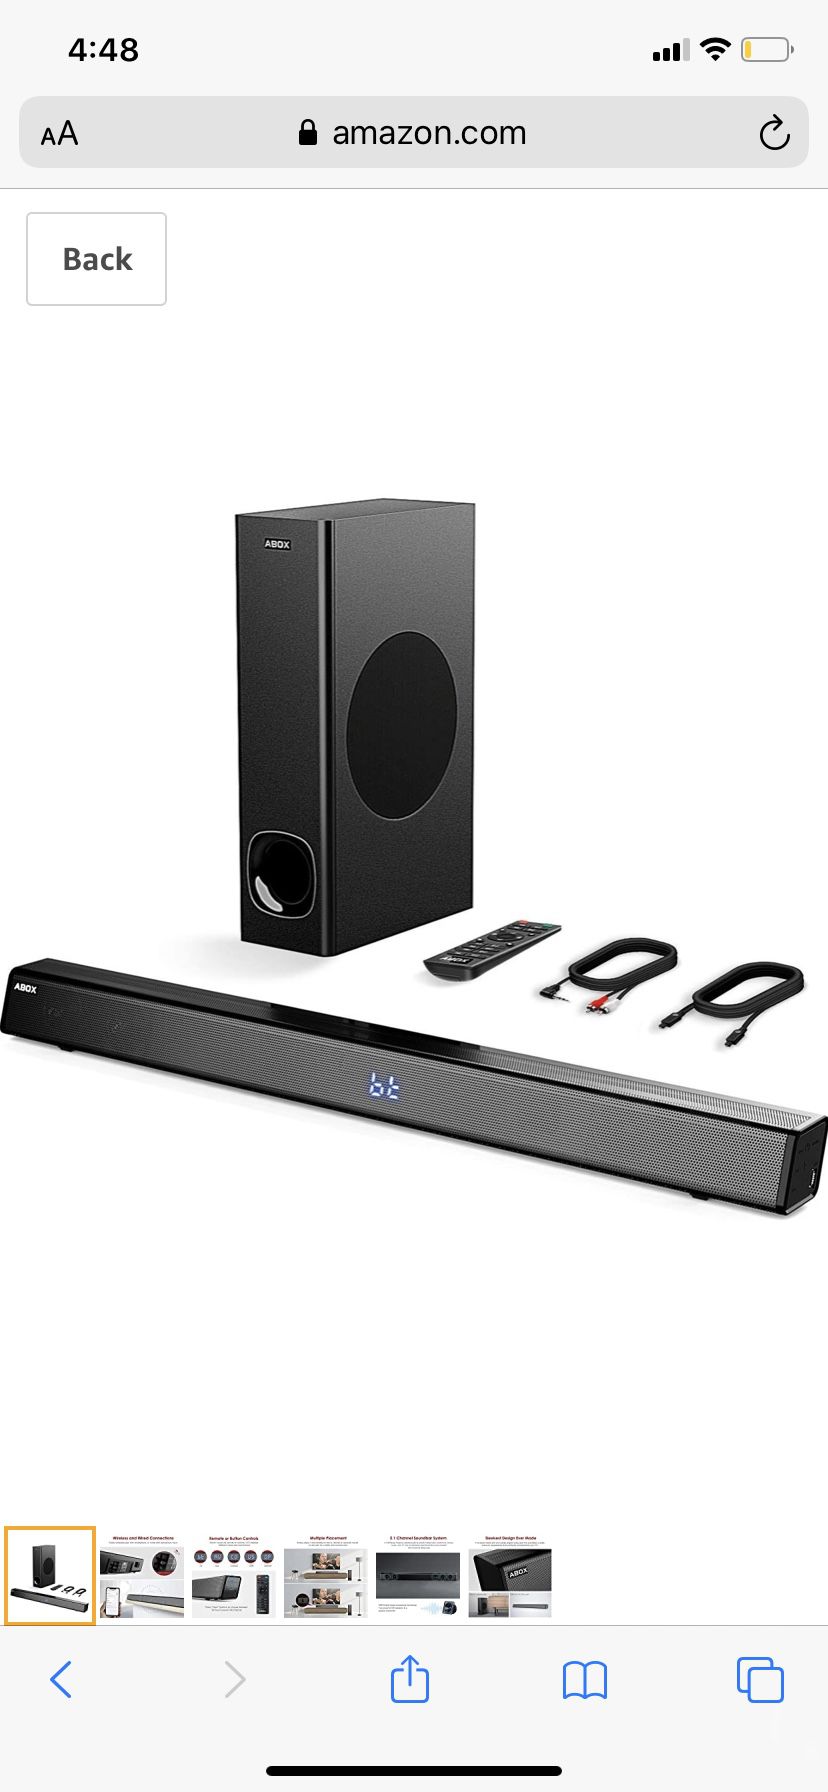 Abox 2.1 Channel Soundbar with Subwoofer, ABOX 120W Sound Bar for TV, Wireless & Wired Home Theater Surround Sound, 5 Input with Remote Control, Wall